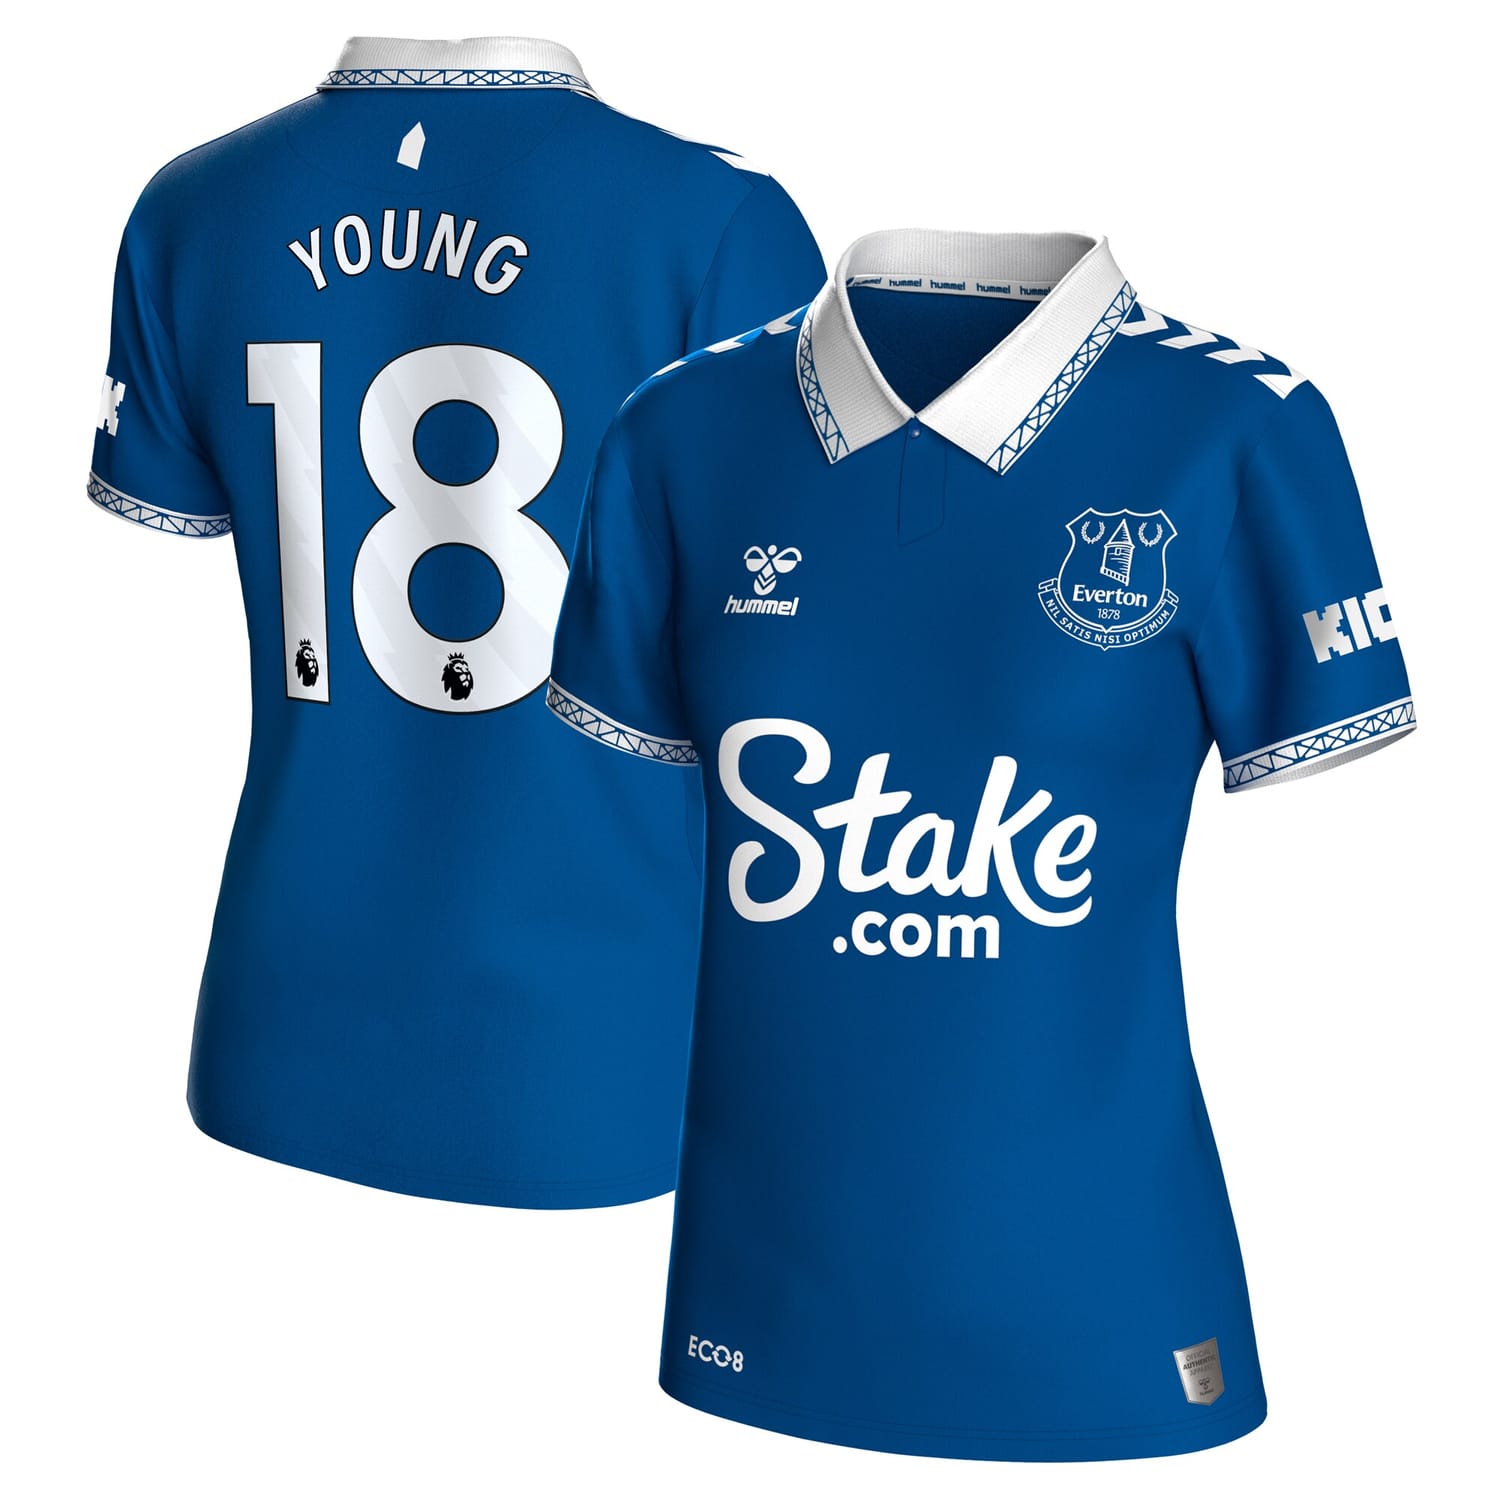 Premier League Everton Home Jersey Shirt 2023-24 player Young 18 printing for Women